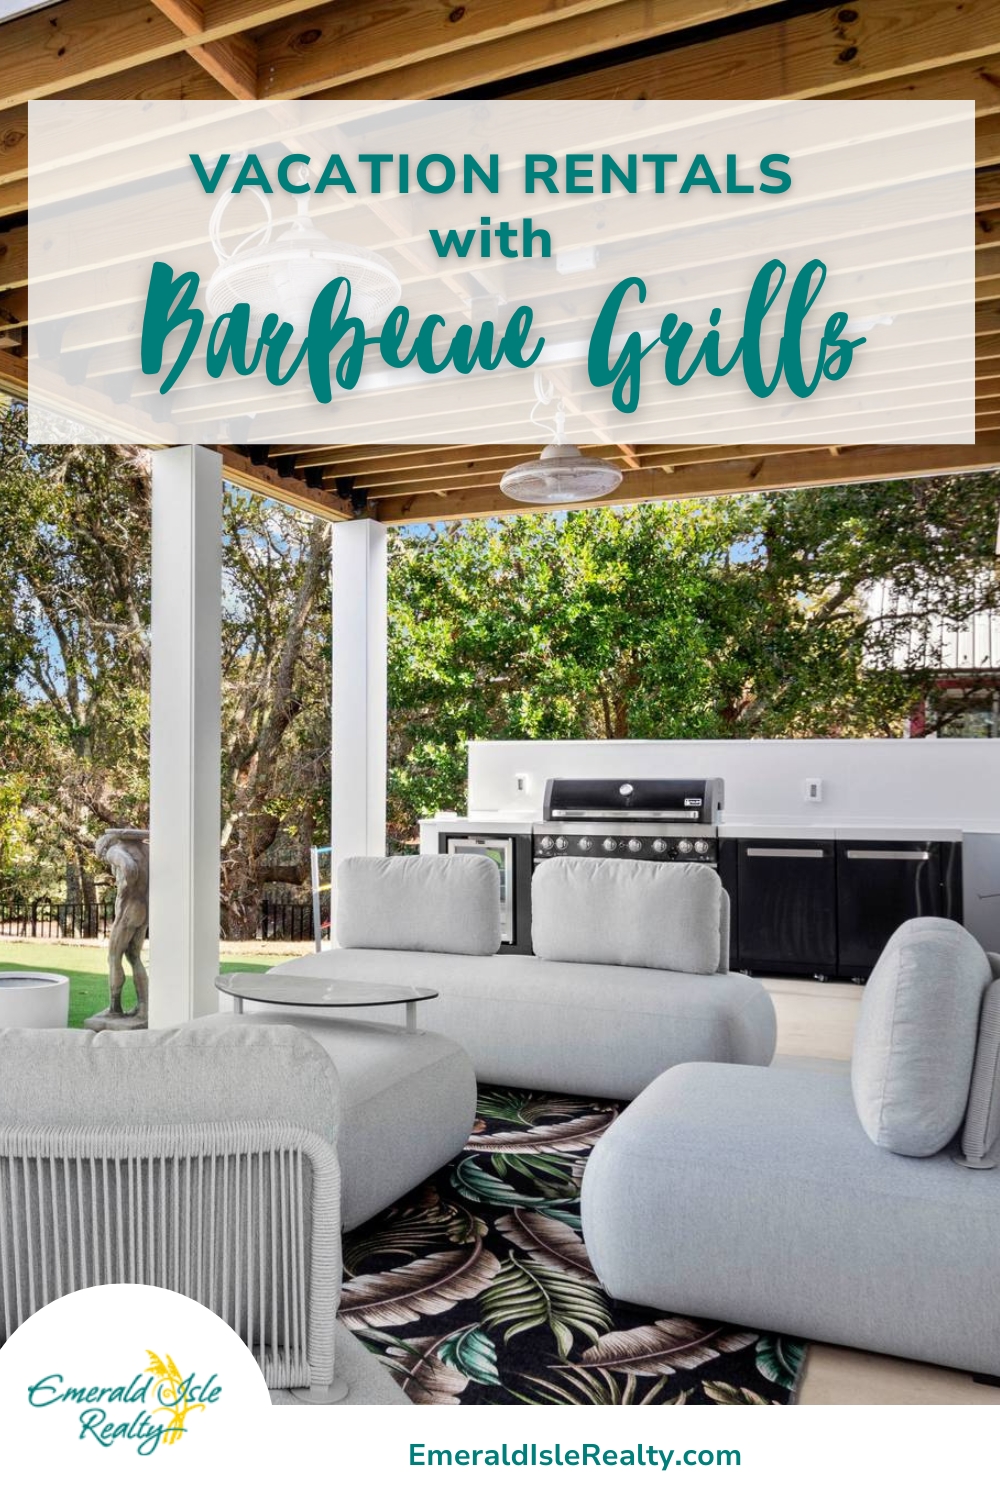 Vacation Rentals with Barbecue Grills in Emerald Isle, NC